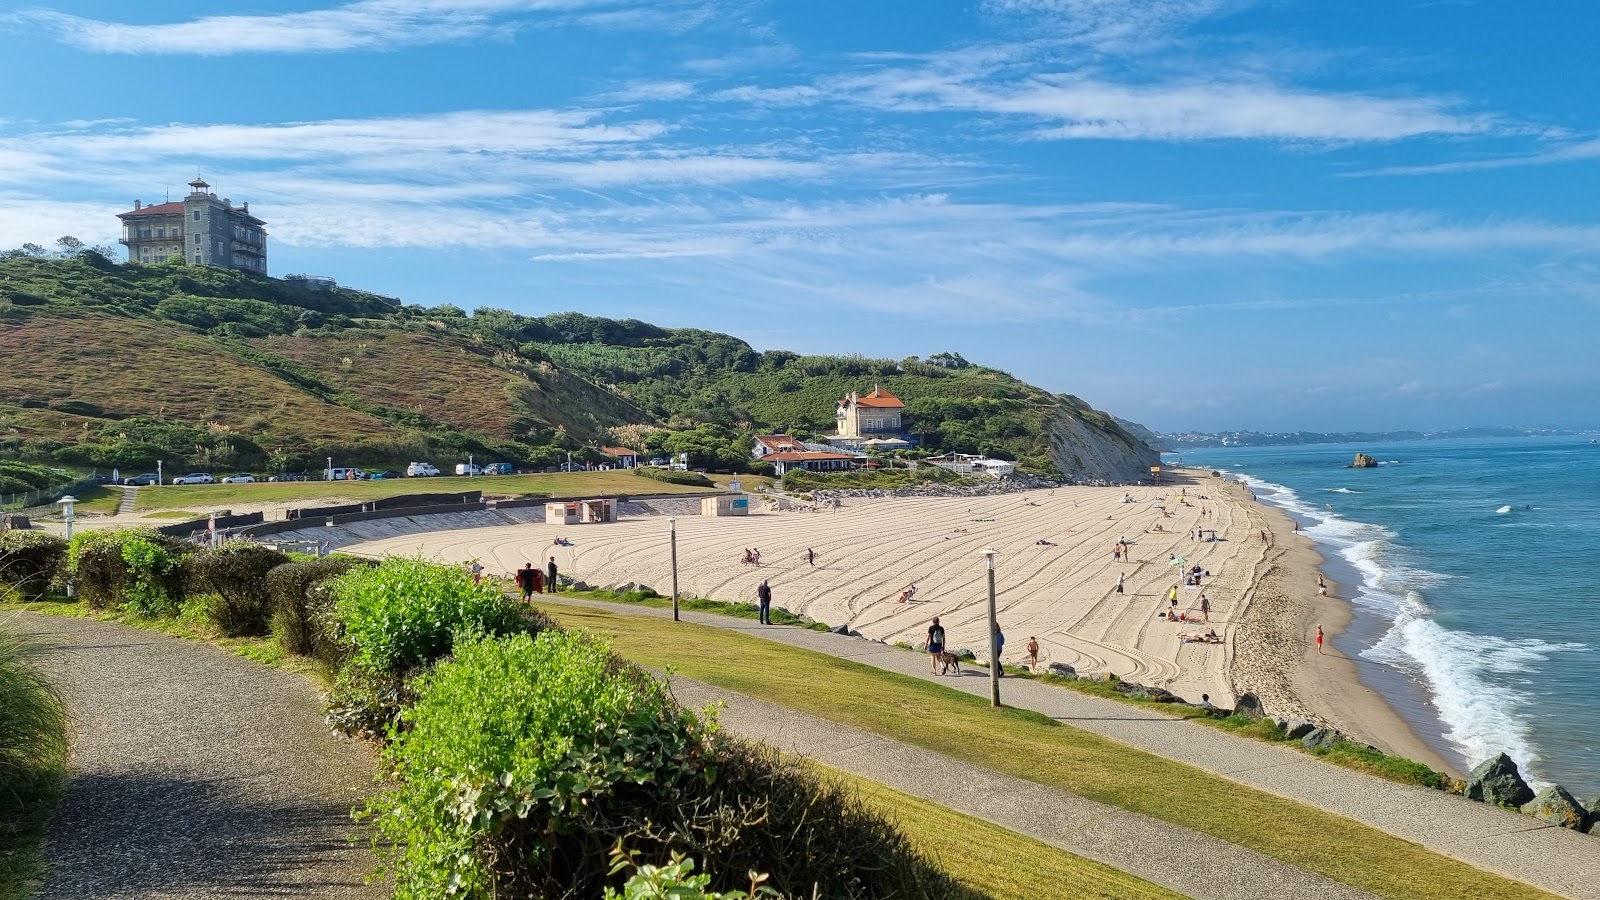 Photo of Plage d'Ilbarritz with bright sand surface